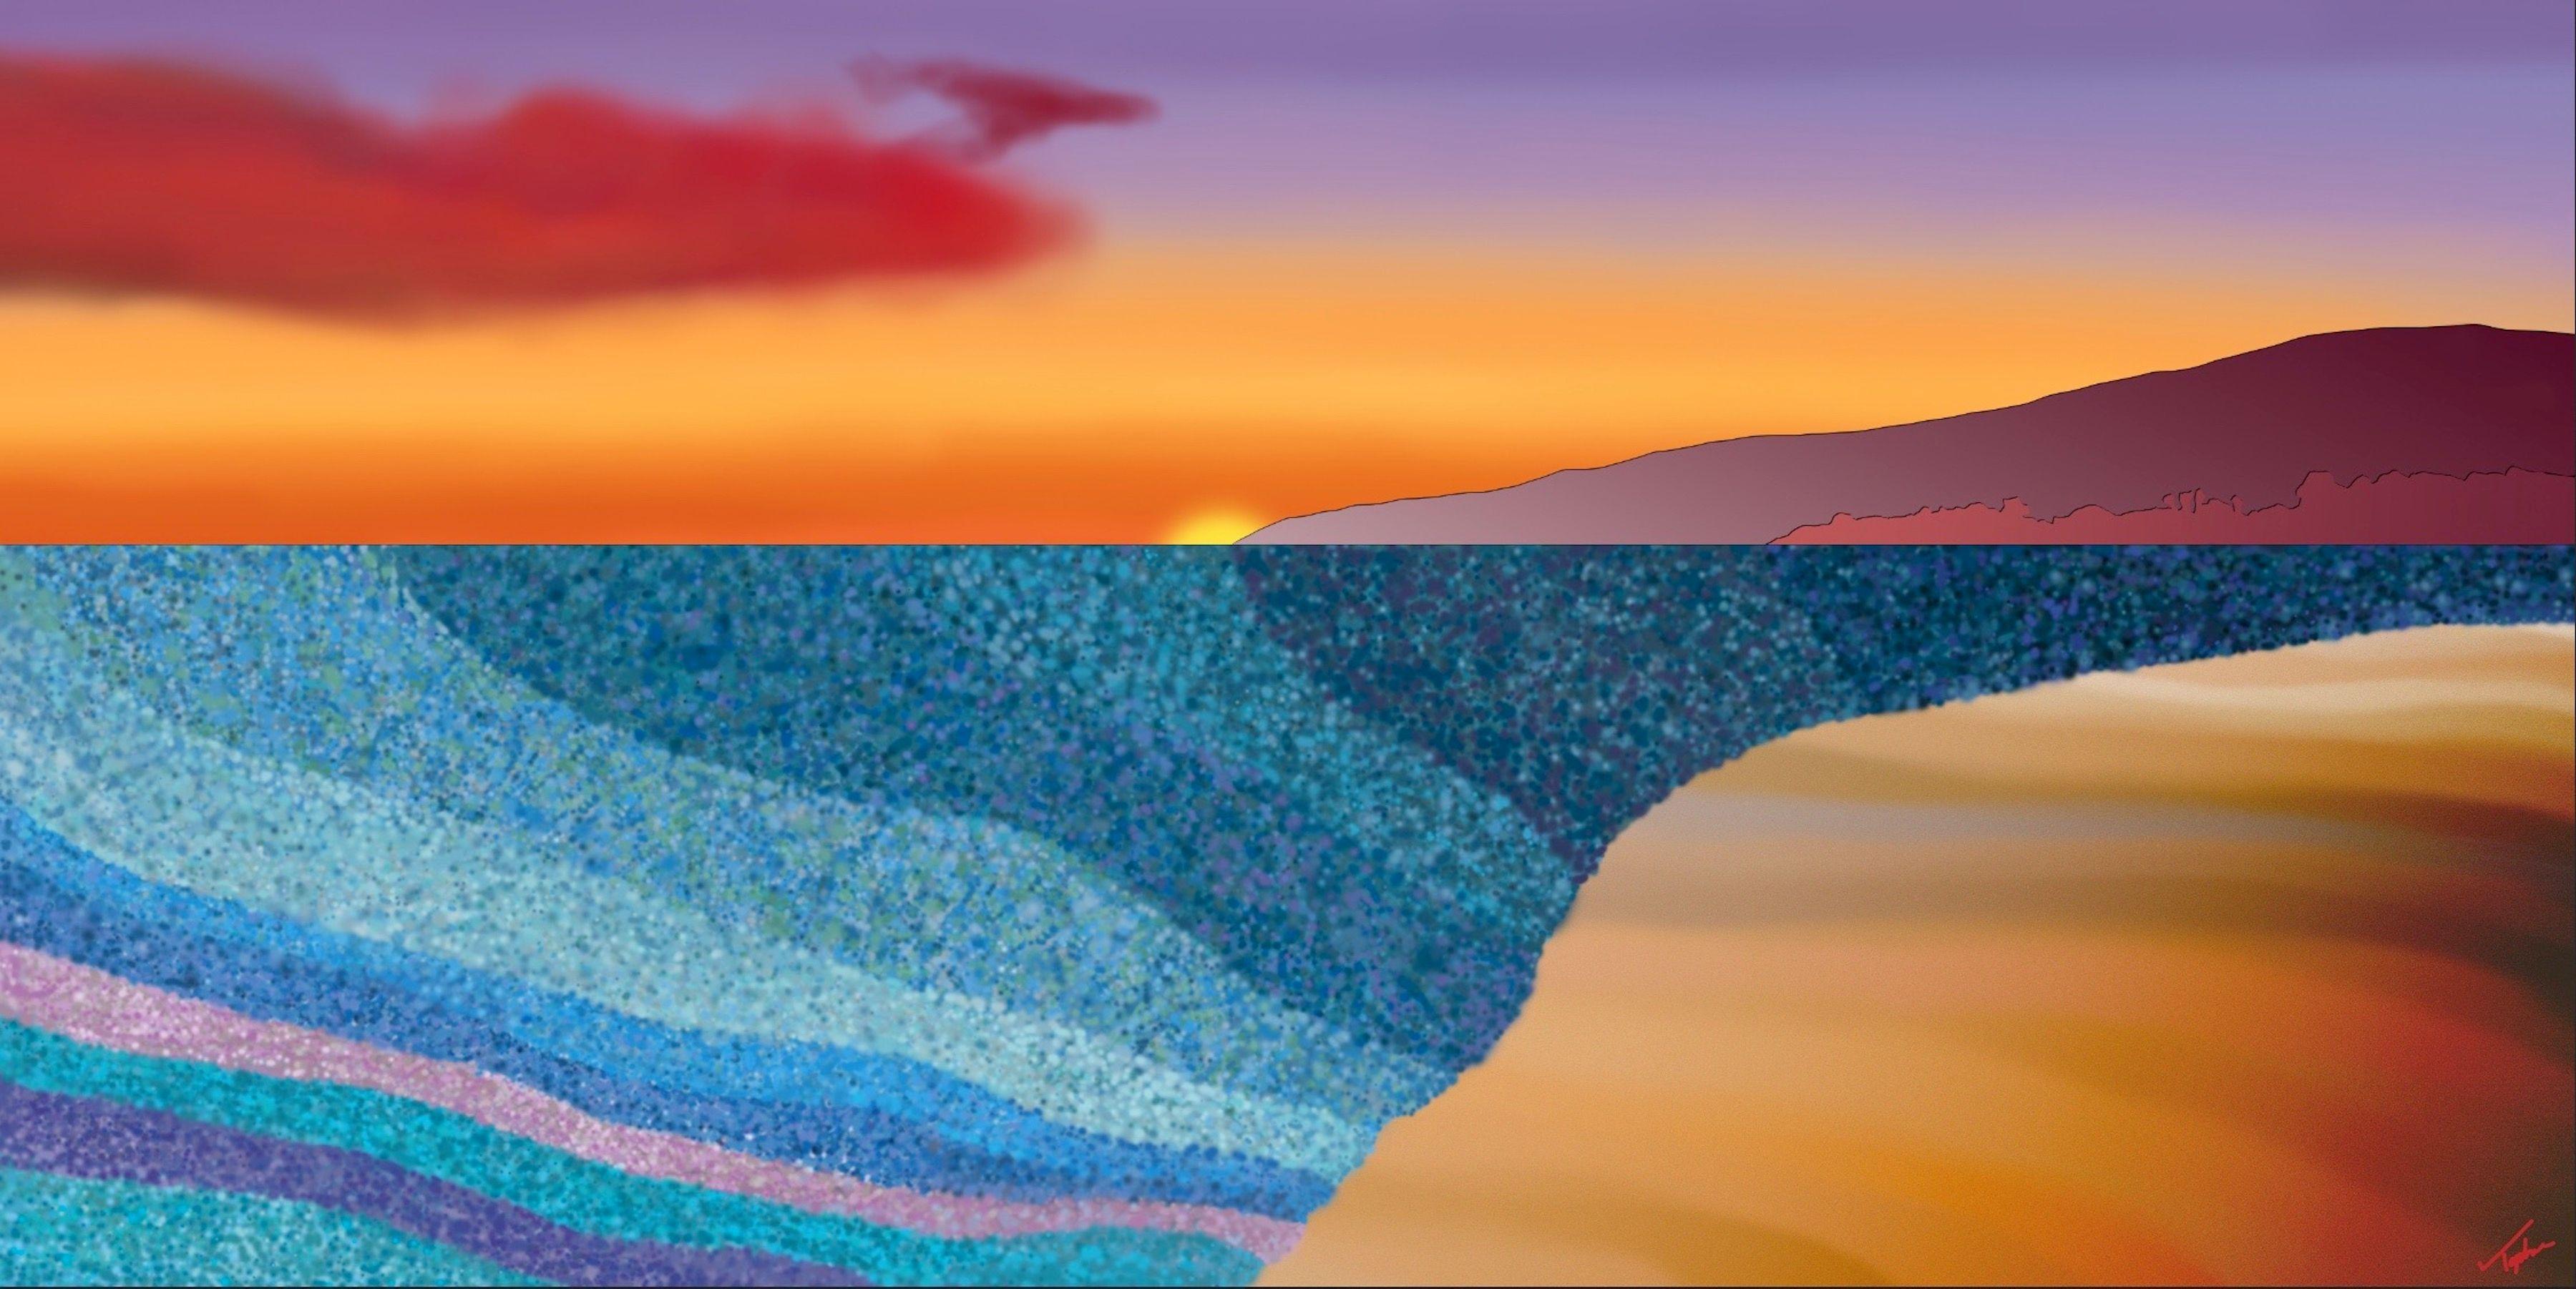 Topher Straus' captivating digital seascape, "Aloha," transports you to the idyllic shores of Maui. Inspired by a cherished evening spent with a dear friend, Straus captures the essence of tranquility and the breathtaking beauty of a Hawaiian sunset